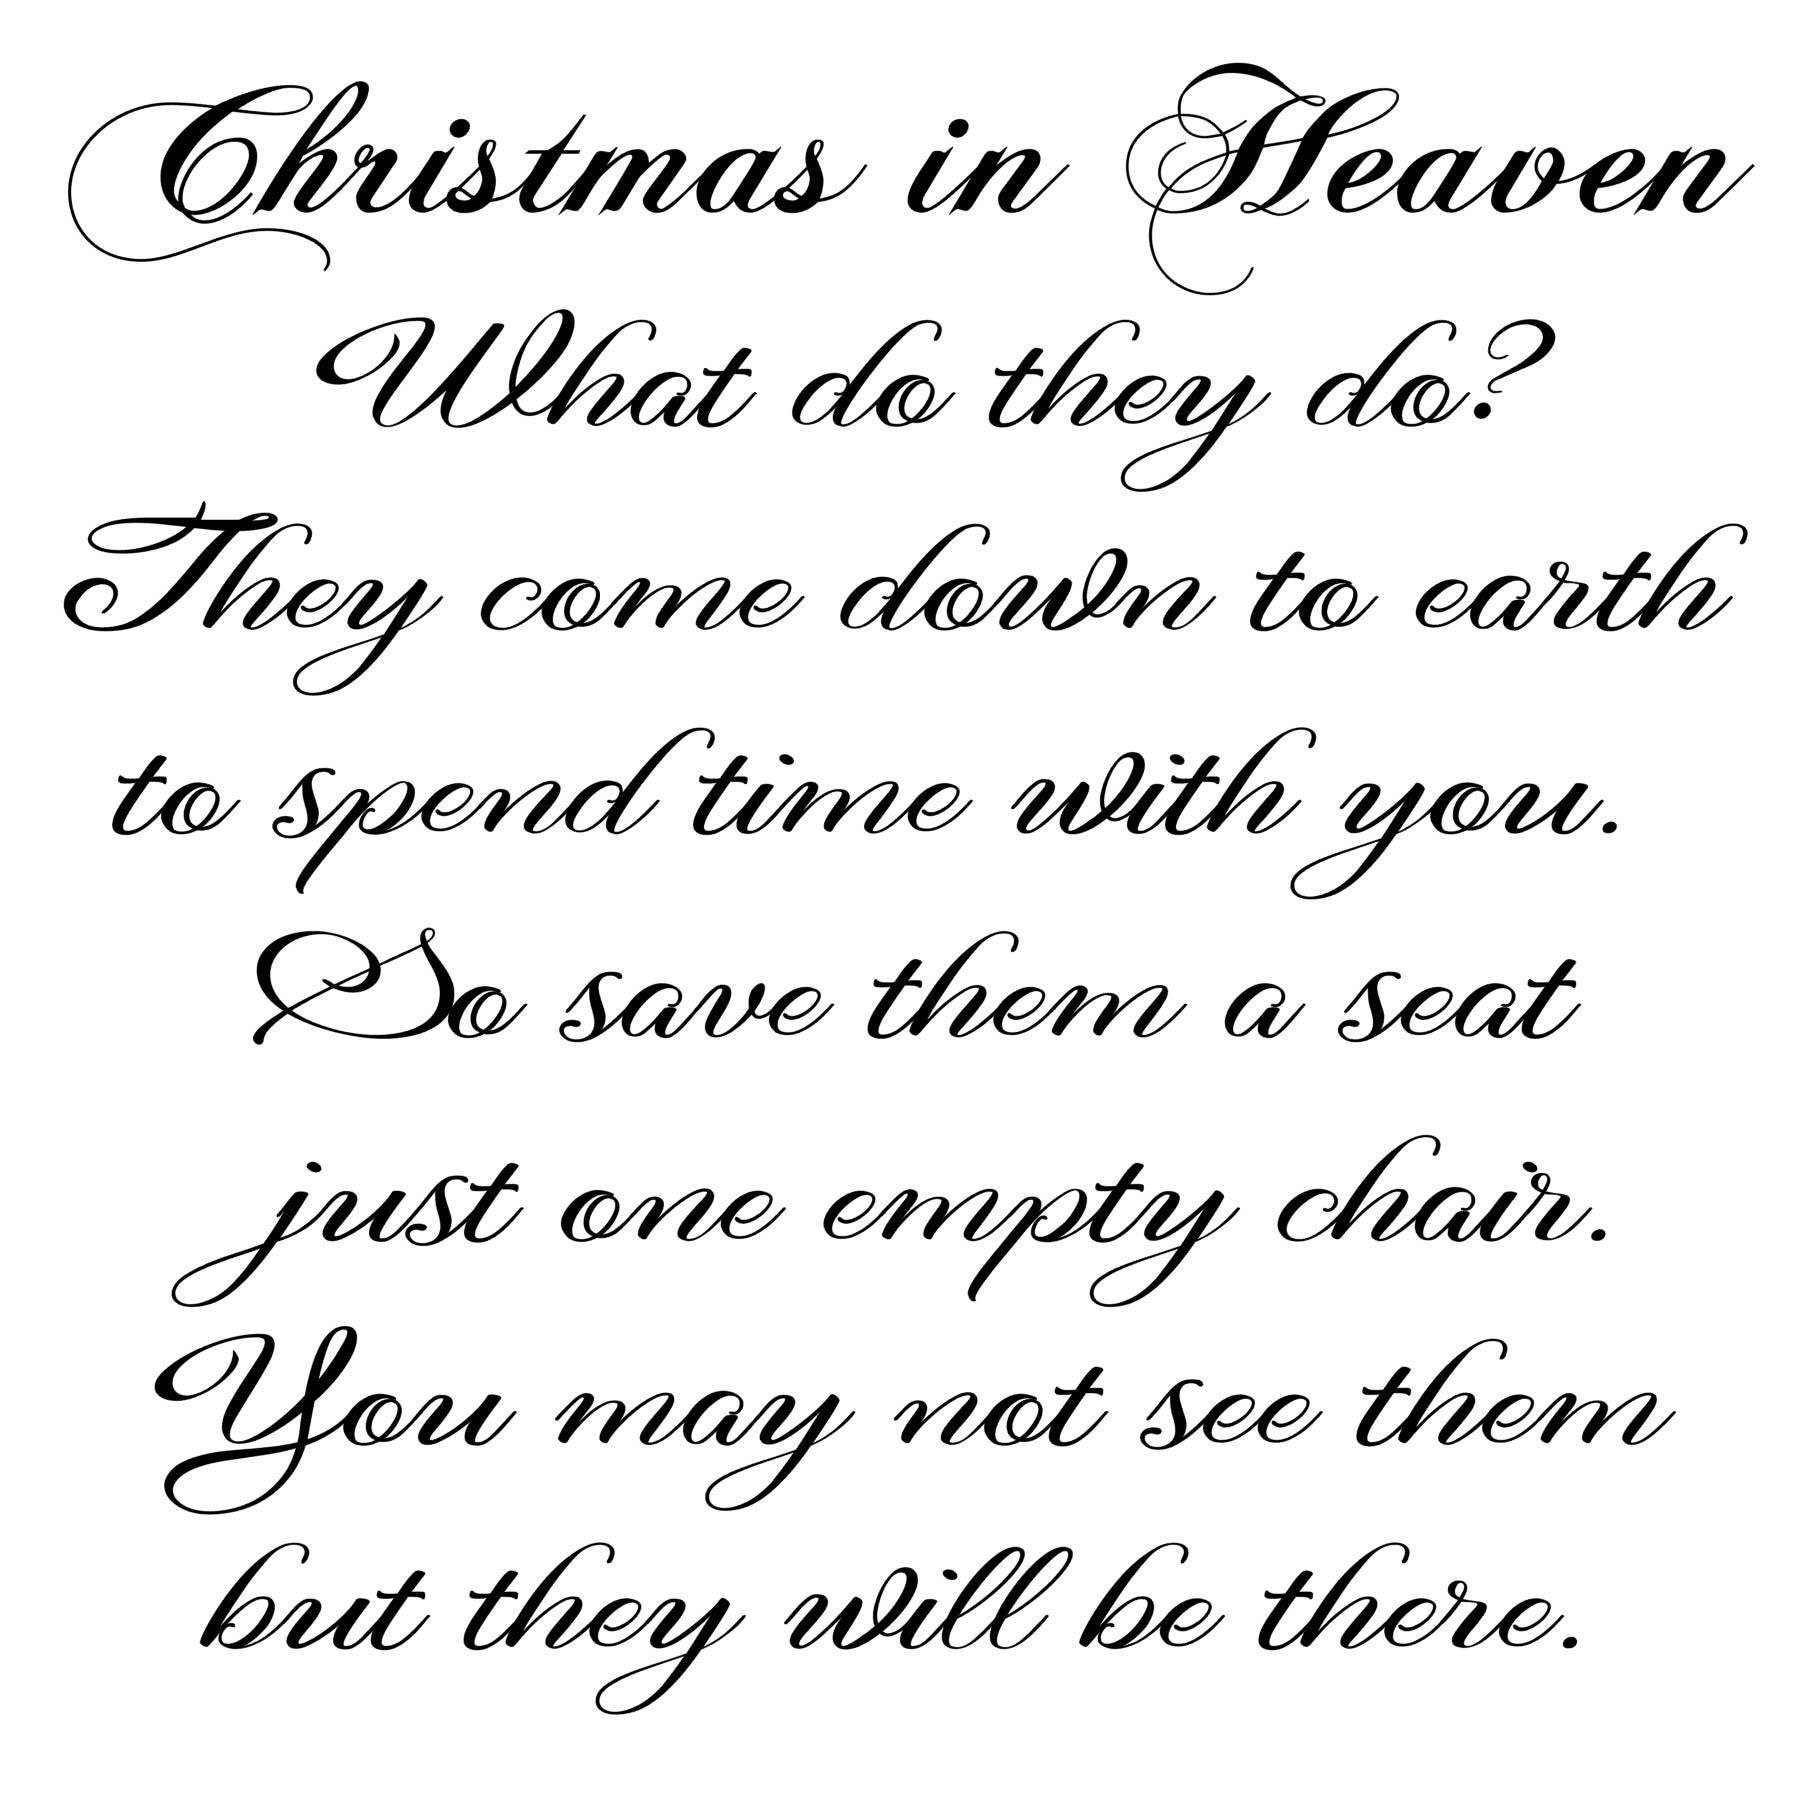 Free SVG Svg Christmas In Heaven 19280+ File for Silhouette